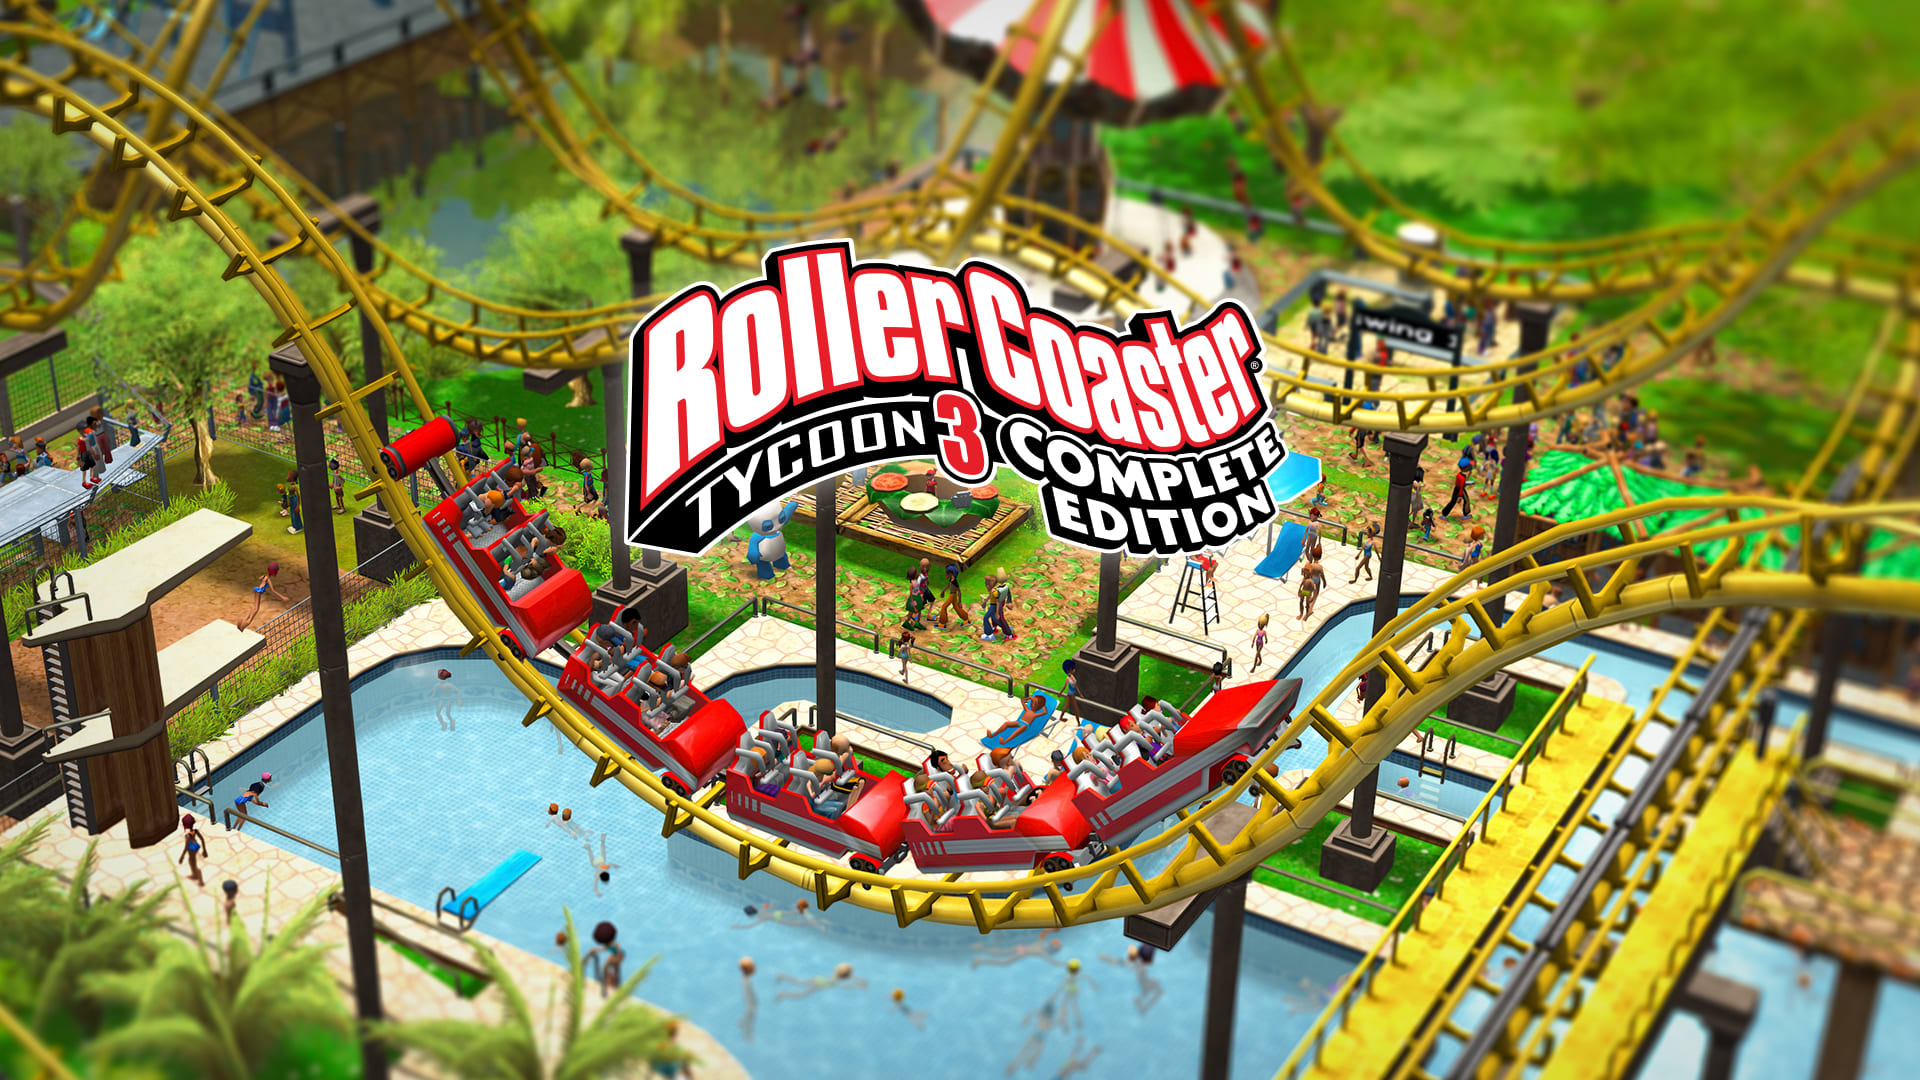 RollerCoaster Tycoon 3 Complete Edition for Nintendo Switch 